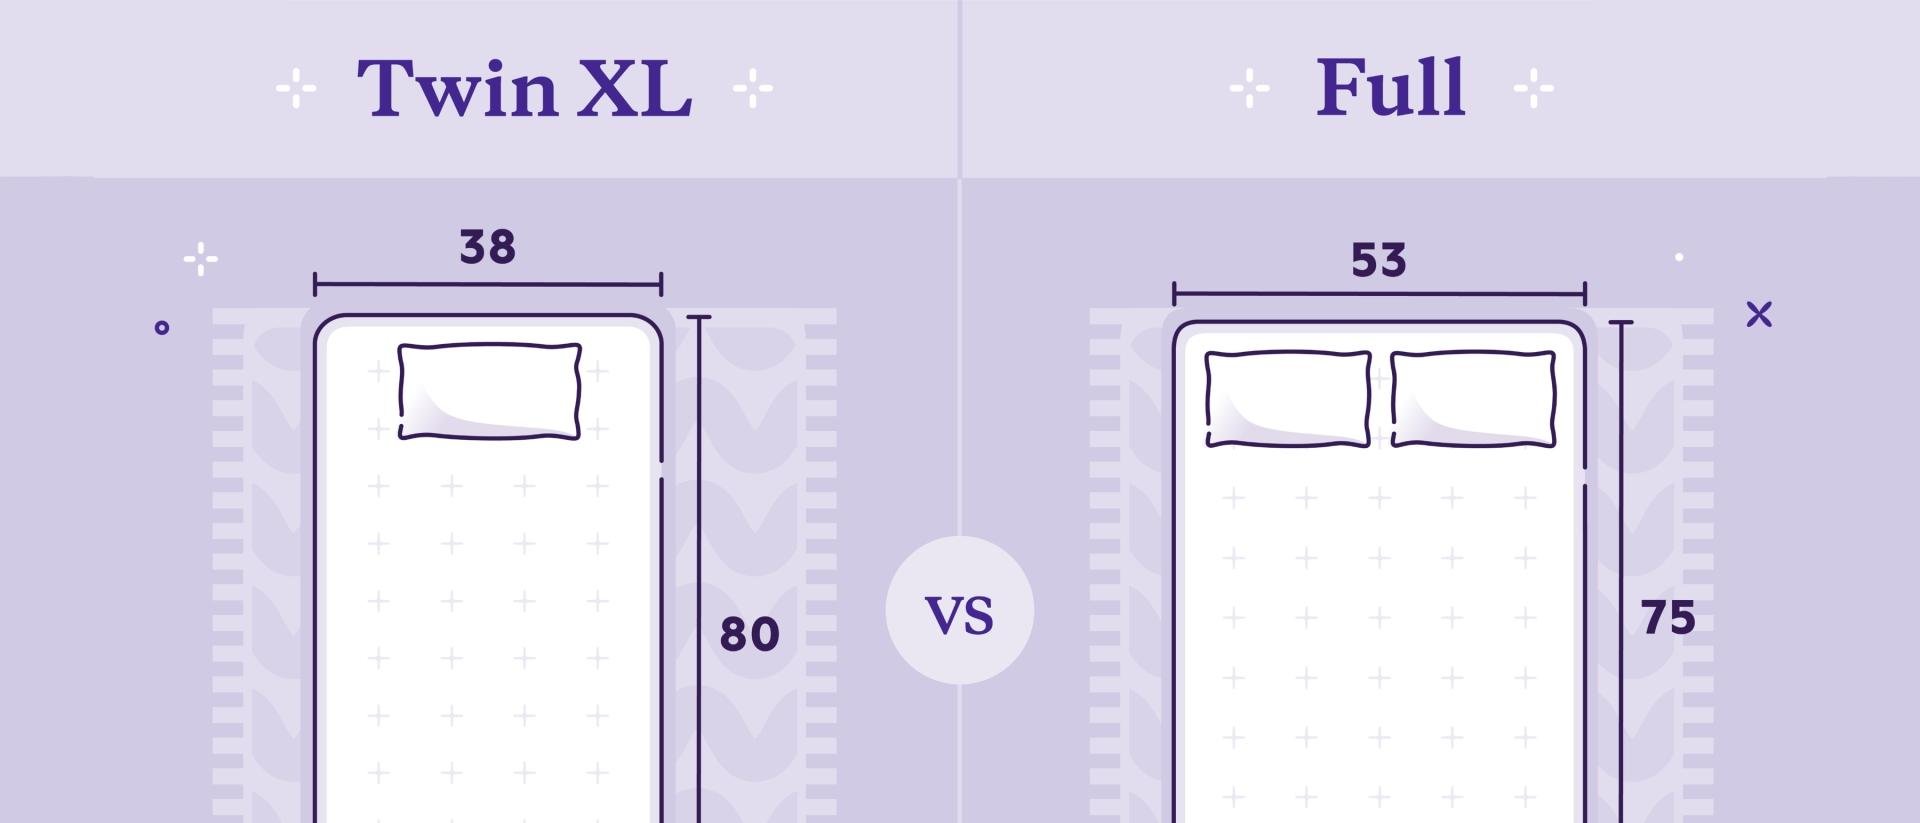 Twin XL vs Split King: Difference + Graphic - Purple